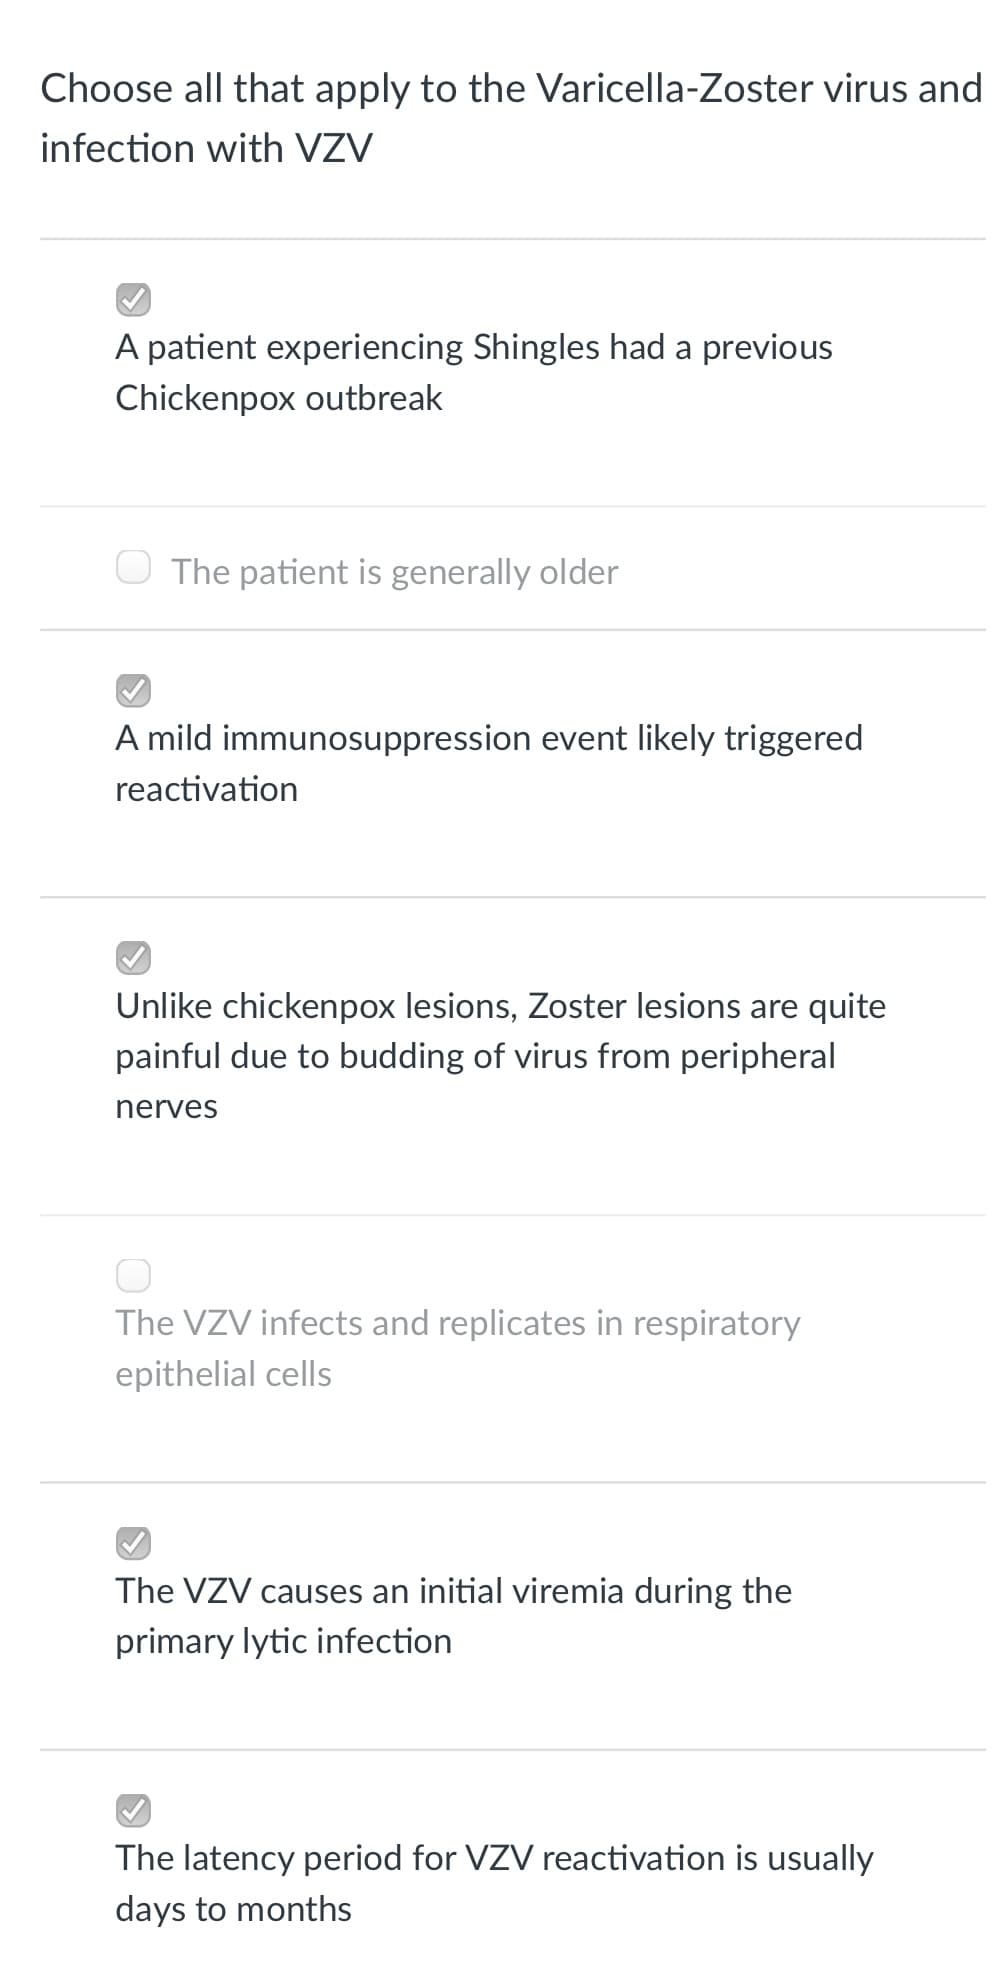 Choose all that apply to the Varicella-Zoster virus and
infection with VZV
A patient experiencing Shingles had a previous
Chickenpox outbreak
O The patient is generally older
A mild immunosuppression event likely triggered
reactivation
Unlike chickenpox lesions, Zoster lesions are quite
painful due to budding of virus from peripheral
nerves
The VZV infects and replicates in respiratory
epithelial cells
The VZV causes an initial viremia during the
primary lytic infection
The latency period for VZV reactivation is usually
days to months
